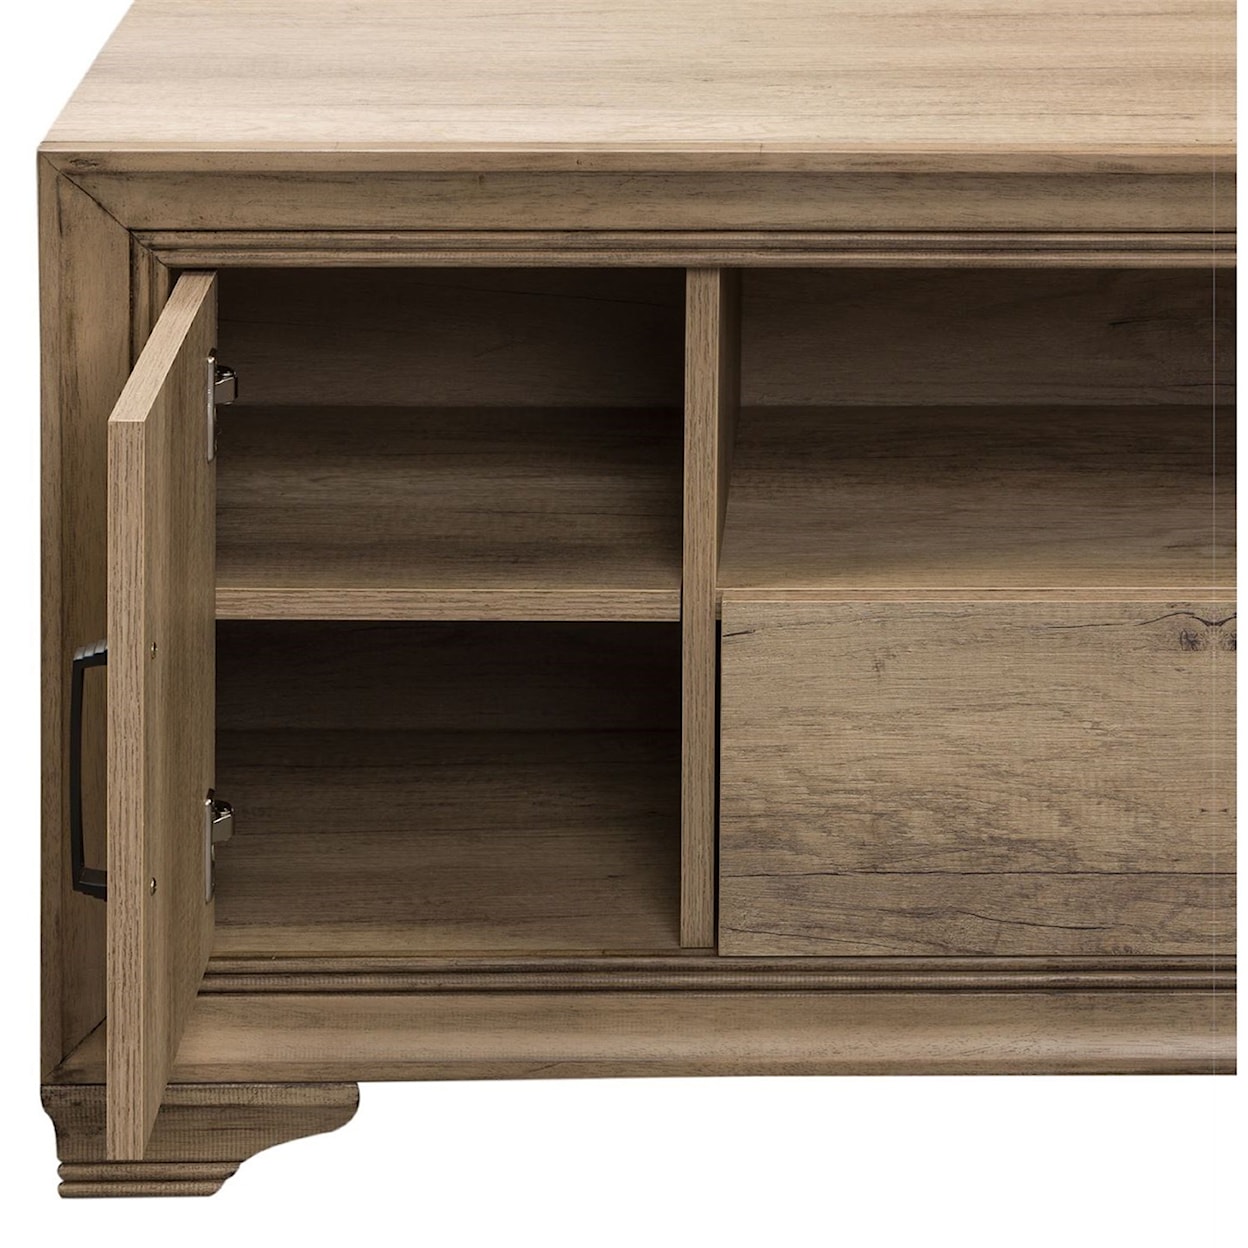 Libby Sun Valley Storage TV Console